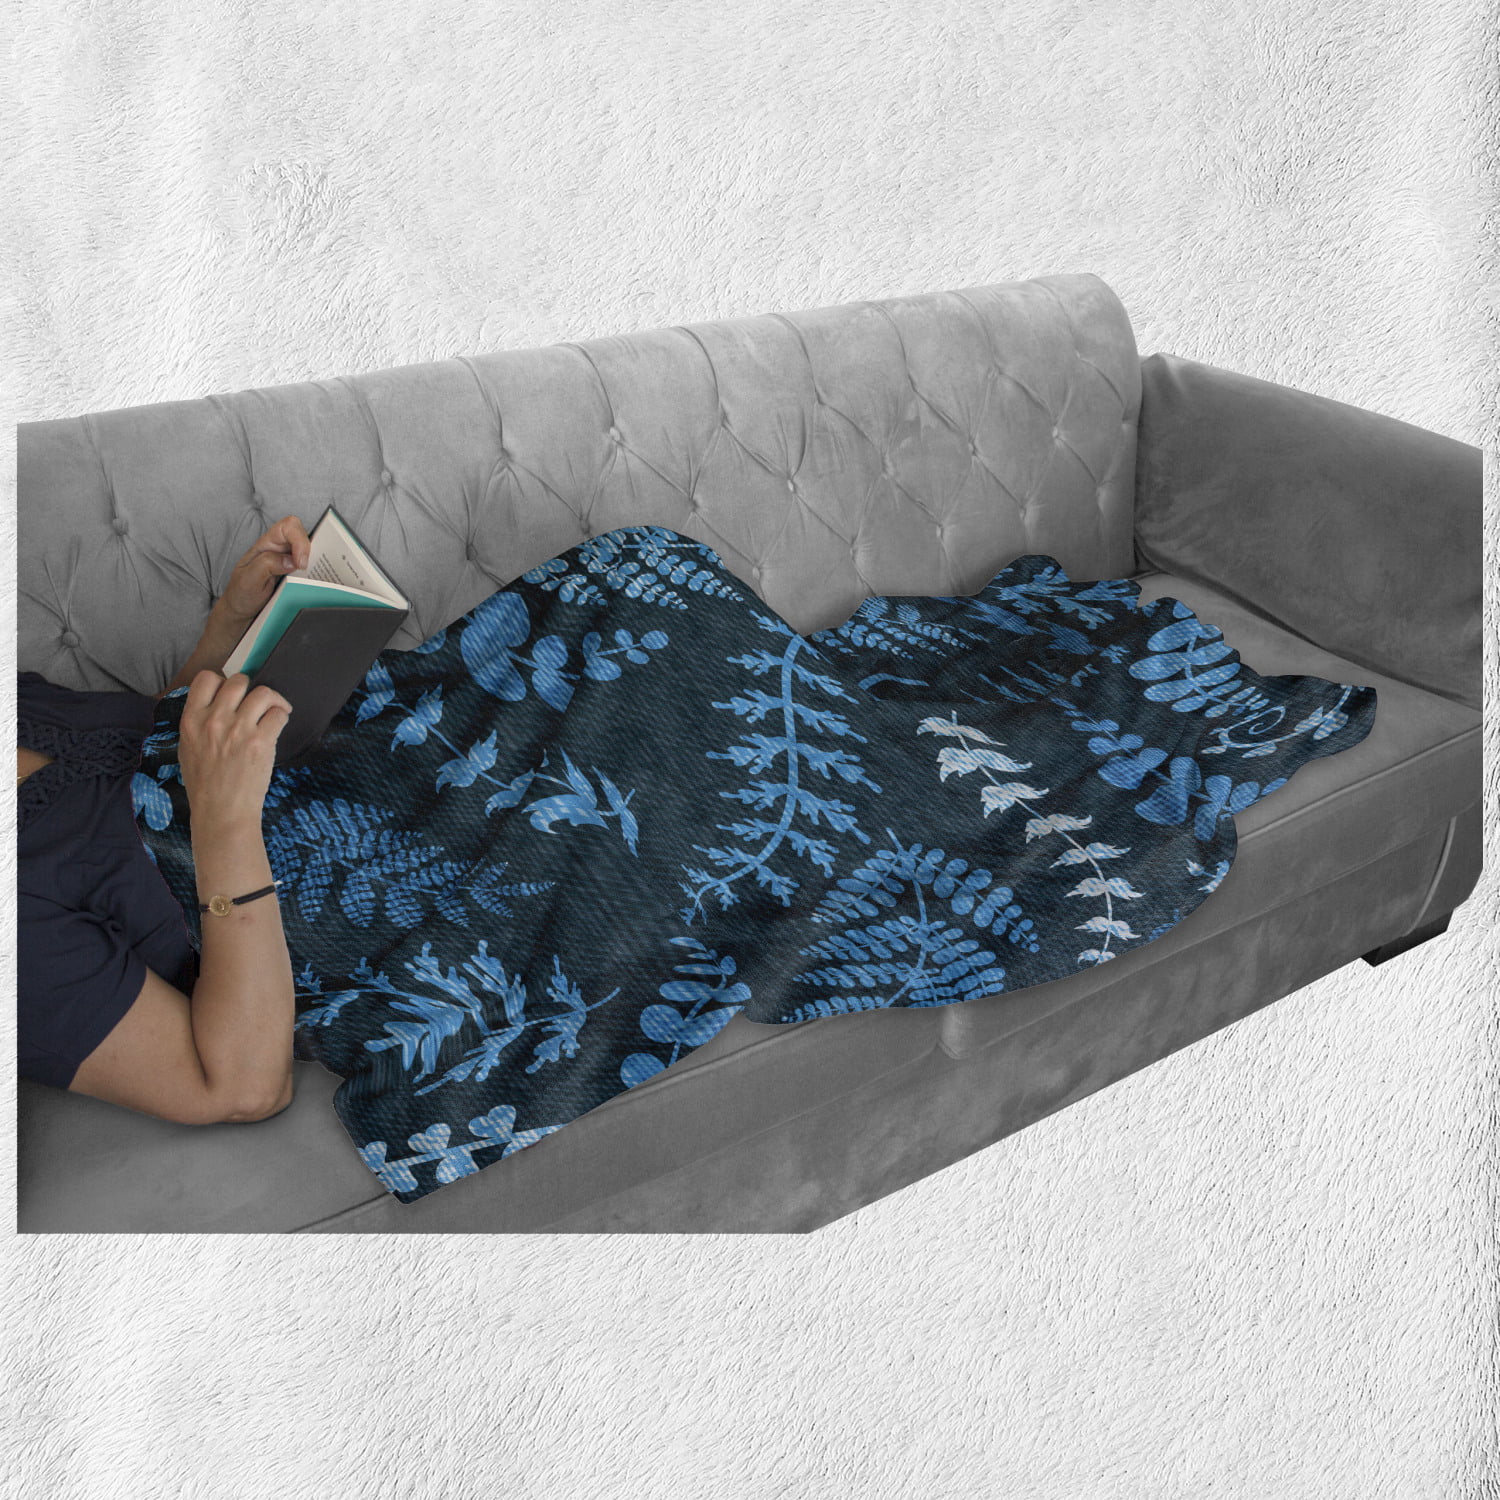 Cozy Plush for Indoor and Outdoor Use Ambesonne Indigo Soft Flannel Fleece Throw Blanket 60 x 80 Turquoise Pale Blue Dark Green Backdrop Floral Swirl Leaves Branches Details Image 